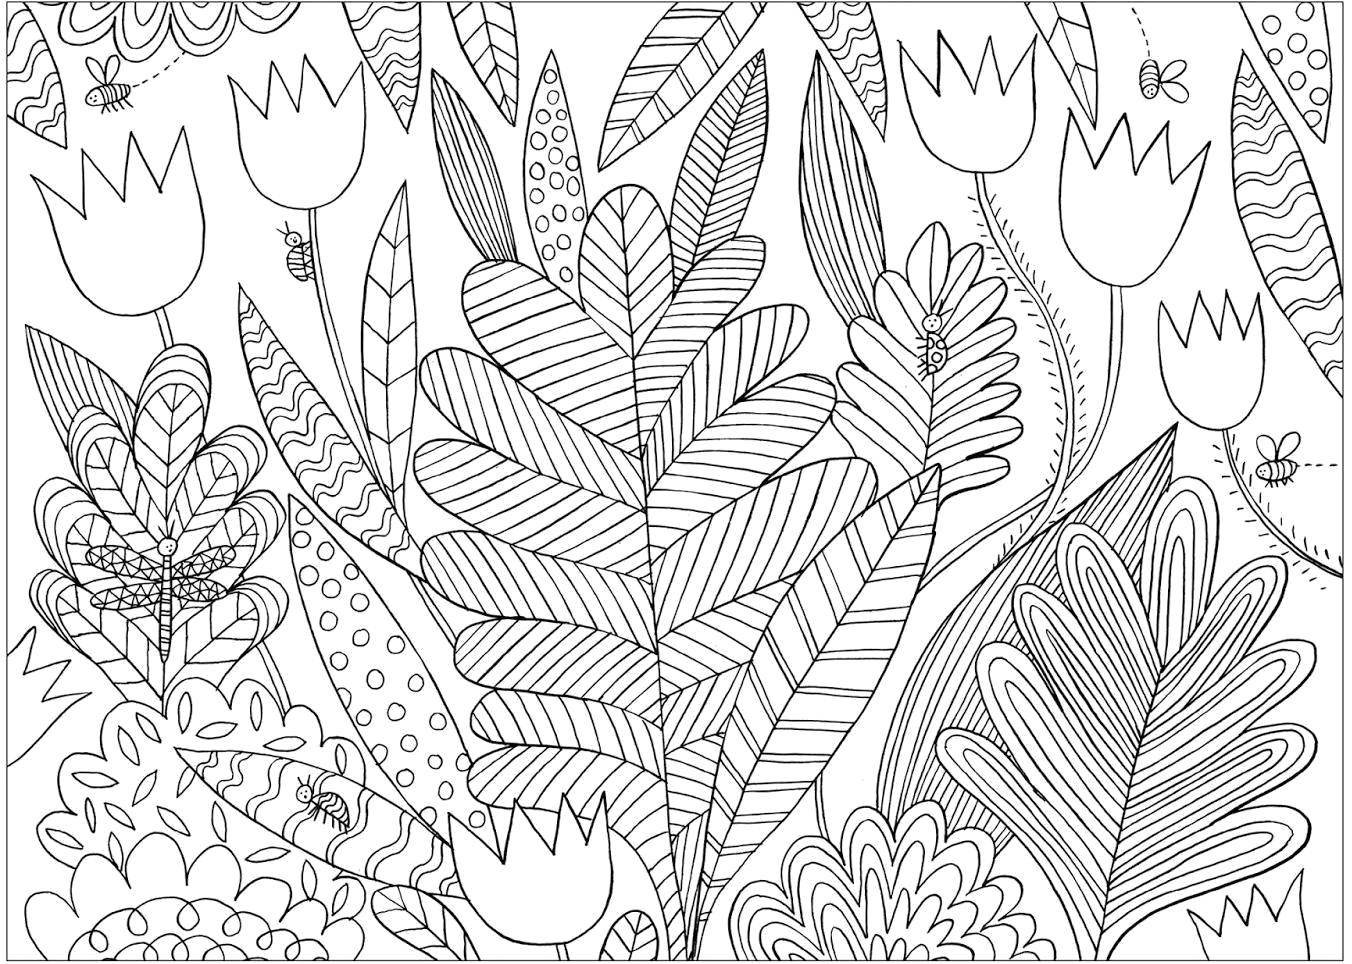 Color live coloring for markers